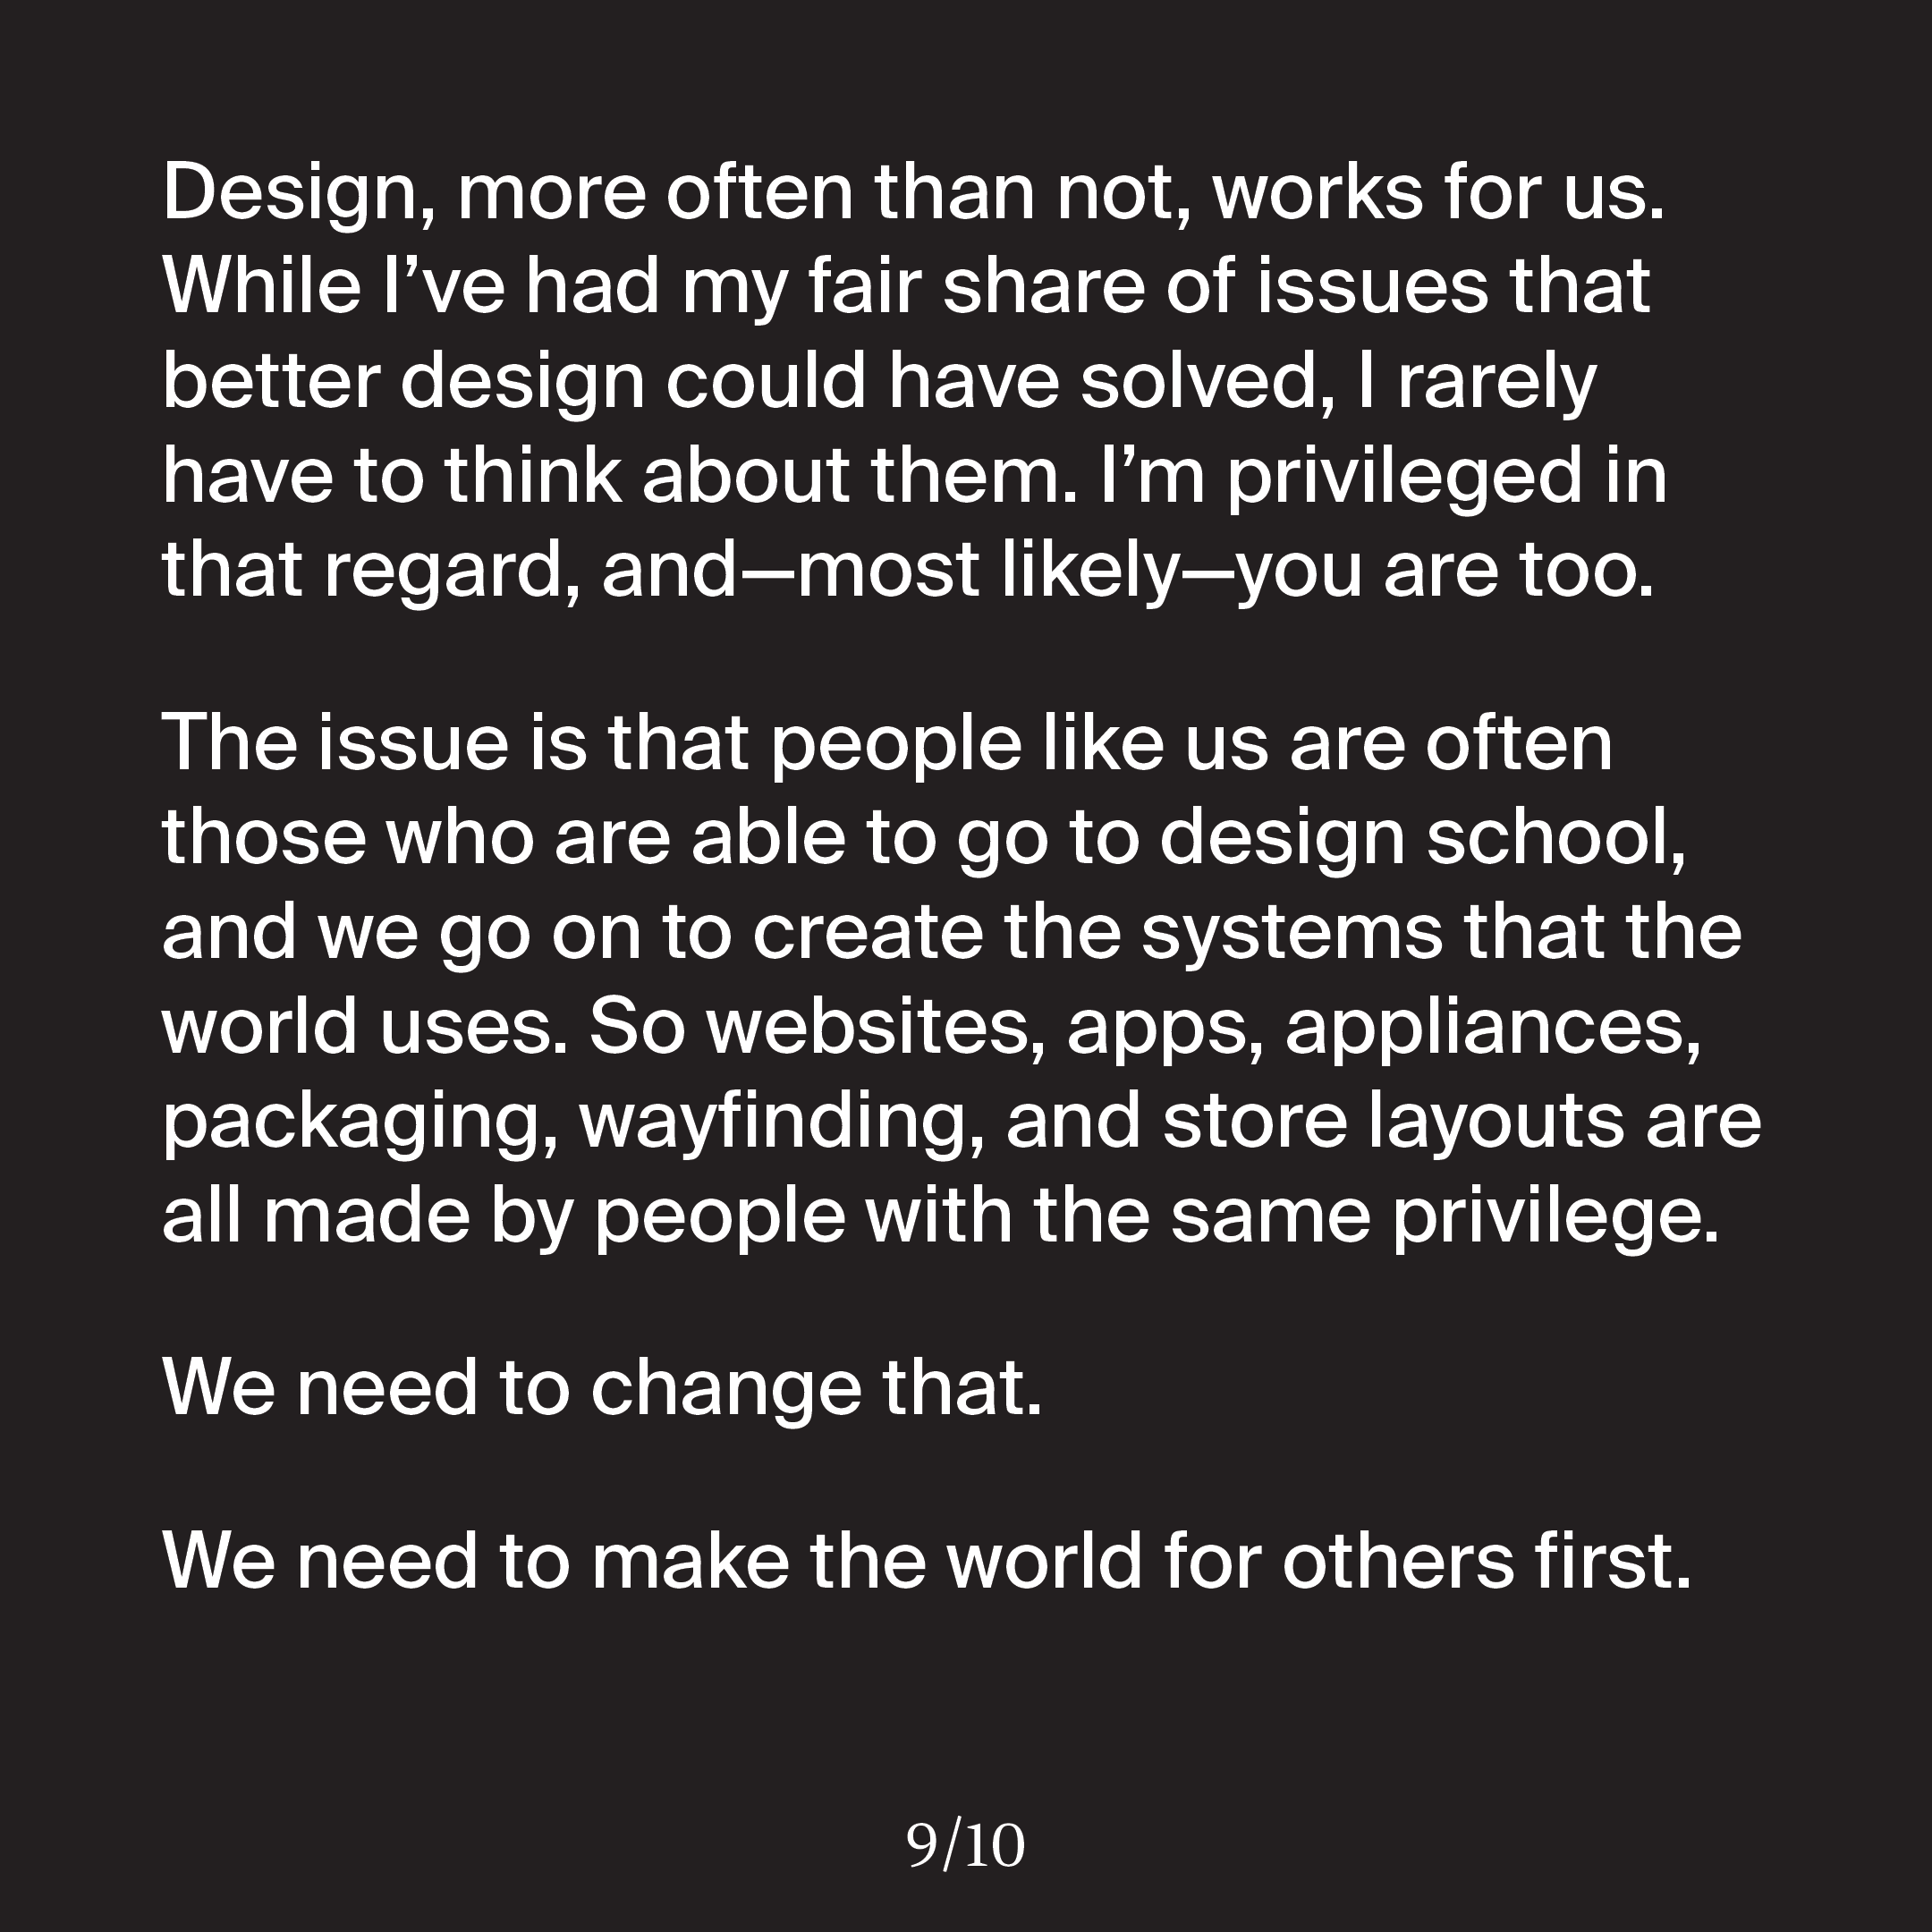 'Design, more often than not, works for us. While I’ve had my fair share of issues that better design could have solved, I rarely have to think about them. I’m privileged in that regard, and—most likely—you are too. The issue is that people like us are often those who are able to go to design school, and we go on to create the systems that the world uses. So websites, apps, appliances, packaging, wayfinding, and store layouts are all made by people with the same privilege. We need to change that. We need to make the world for others first.'